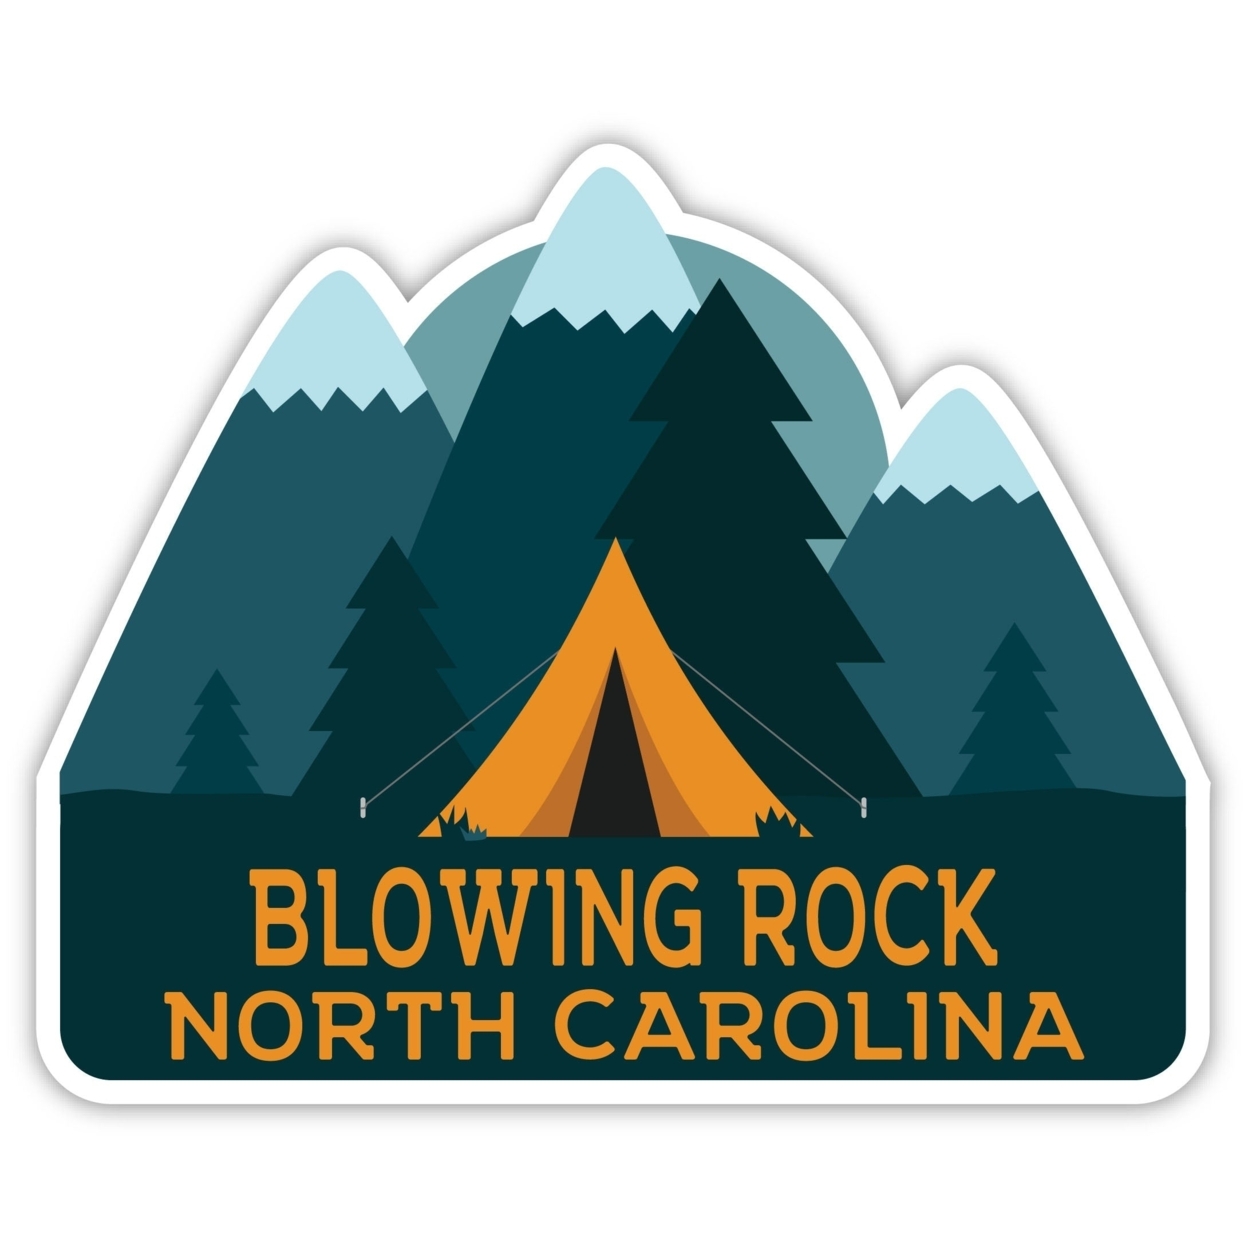 Blowing Rock North Carolina Souvenir Decorative Stickers (Choose Theme And Size) - 4-Pack, 12-Inch, Adventures Awaits